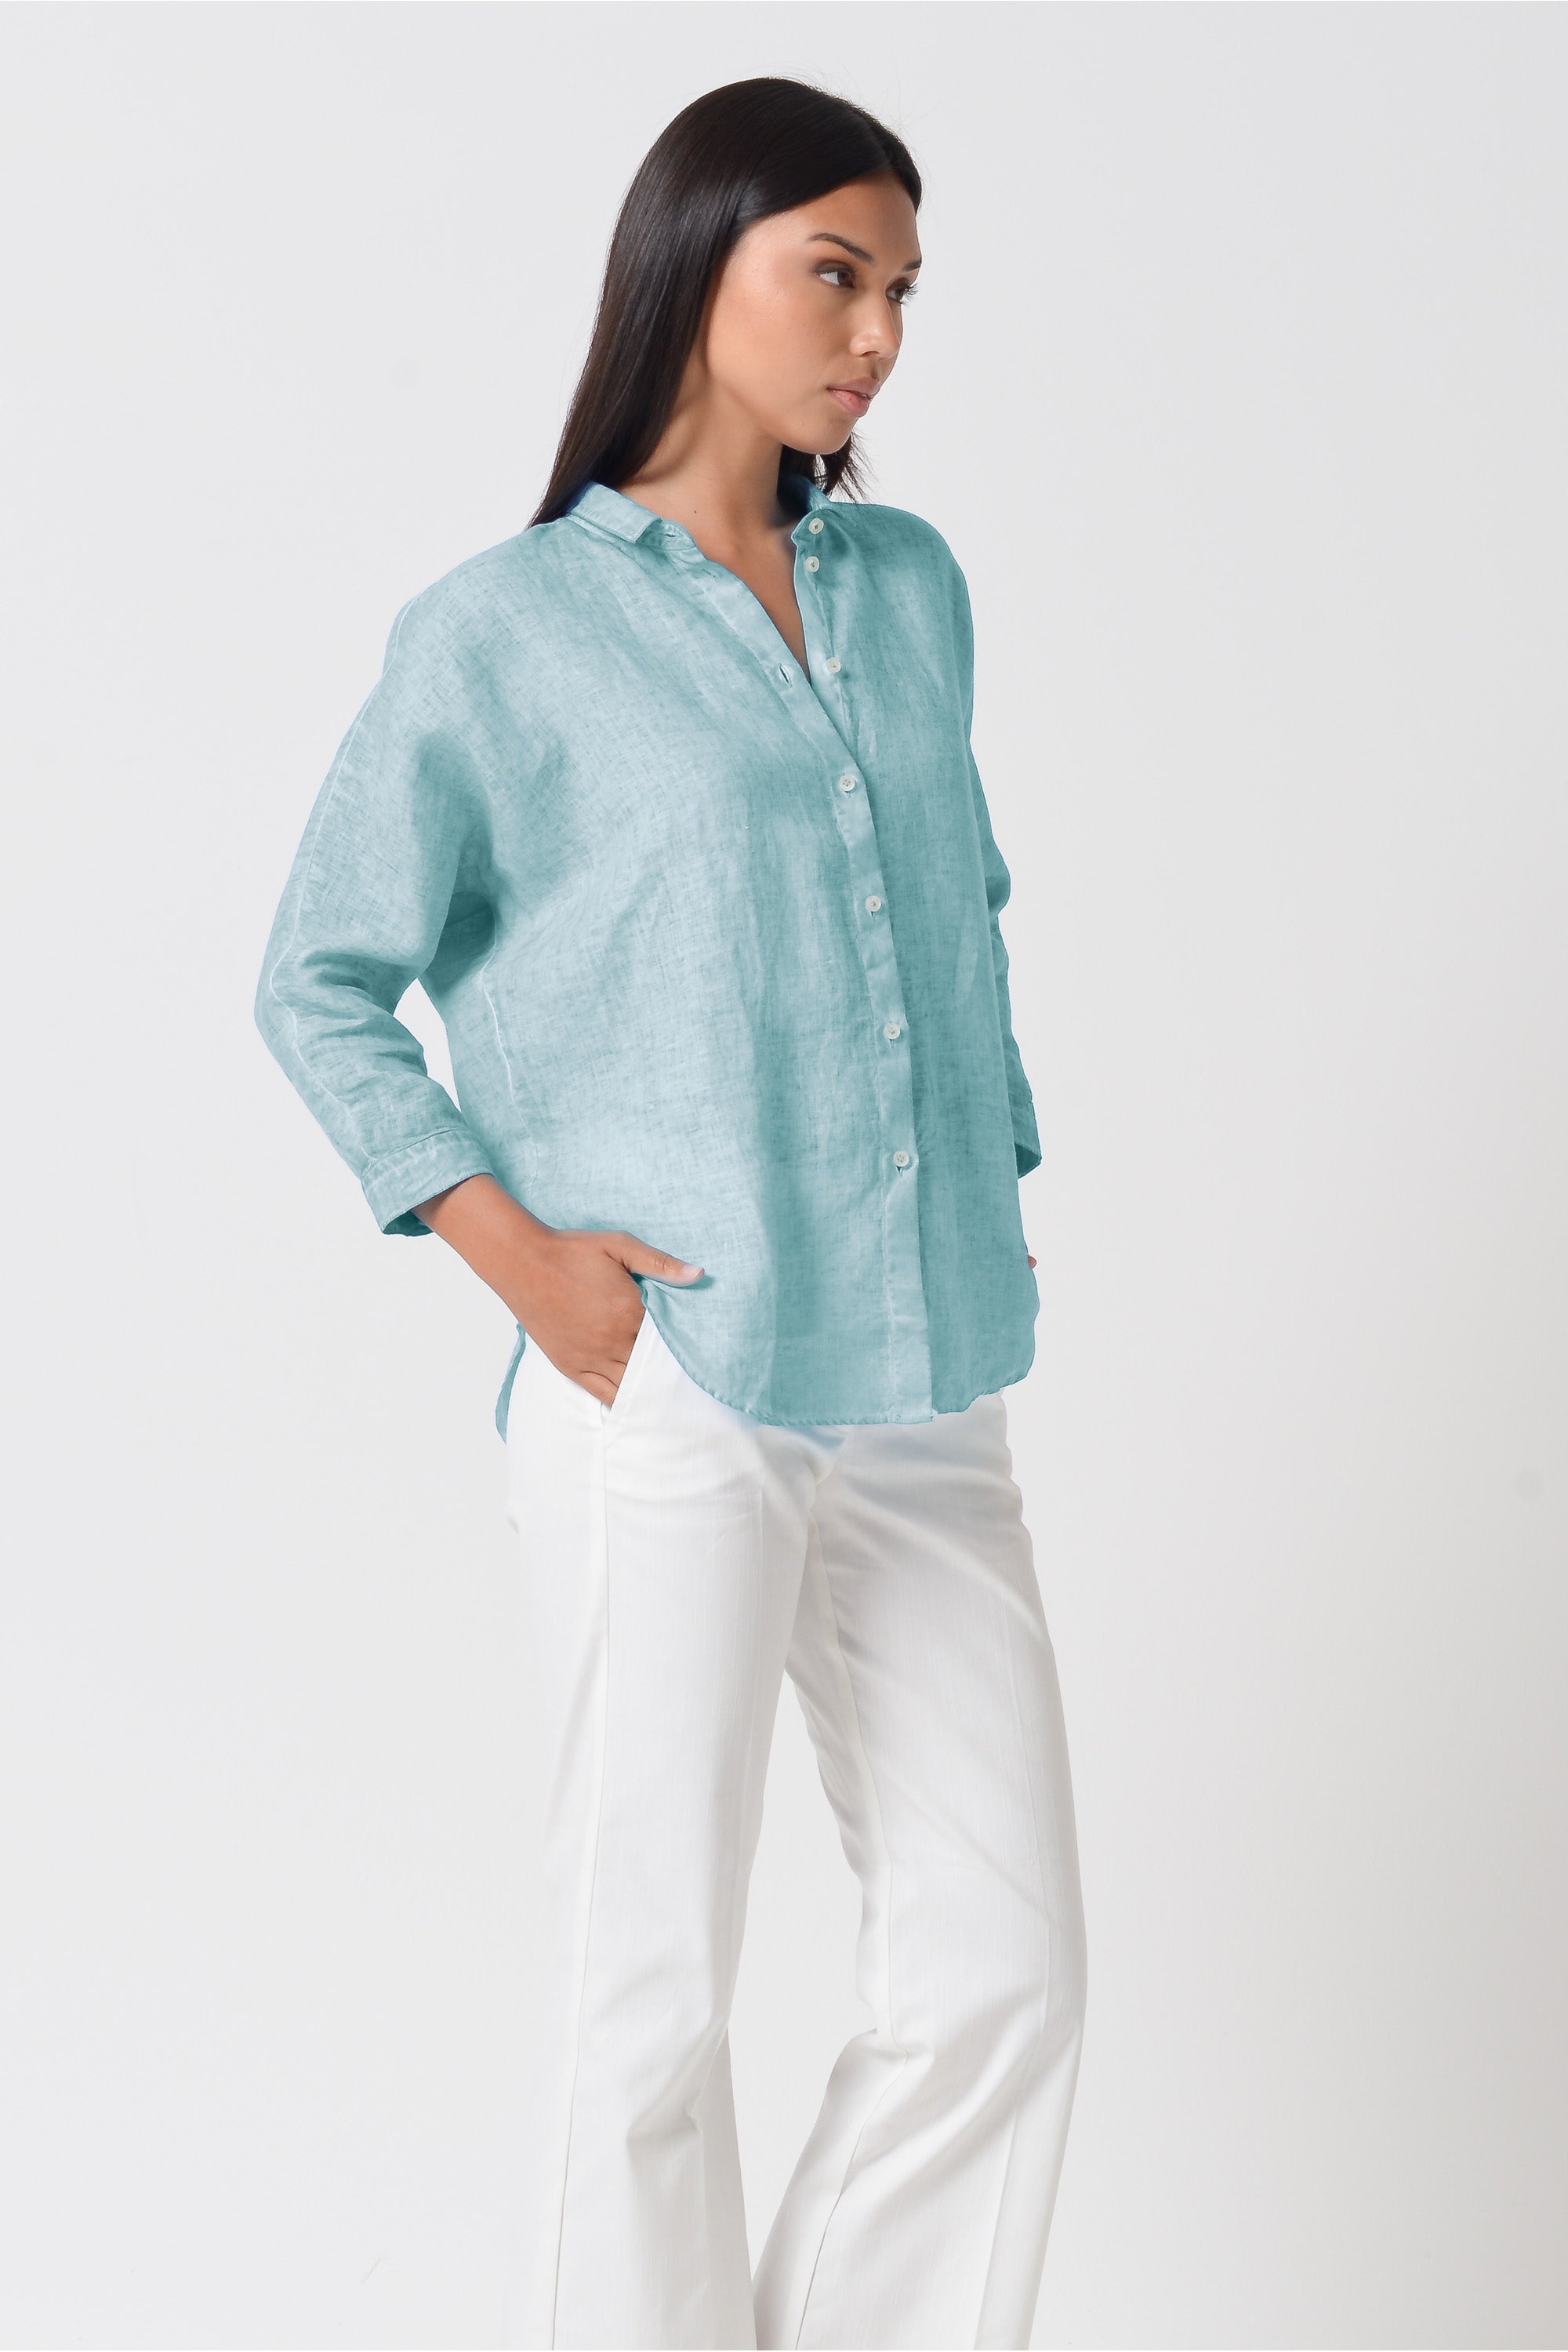 Ollie Blouse in Linen - Barbados